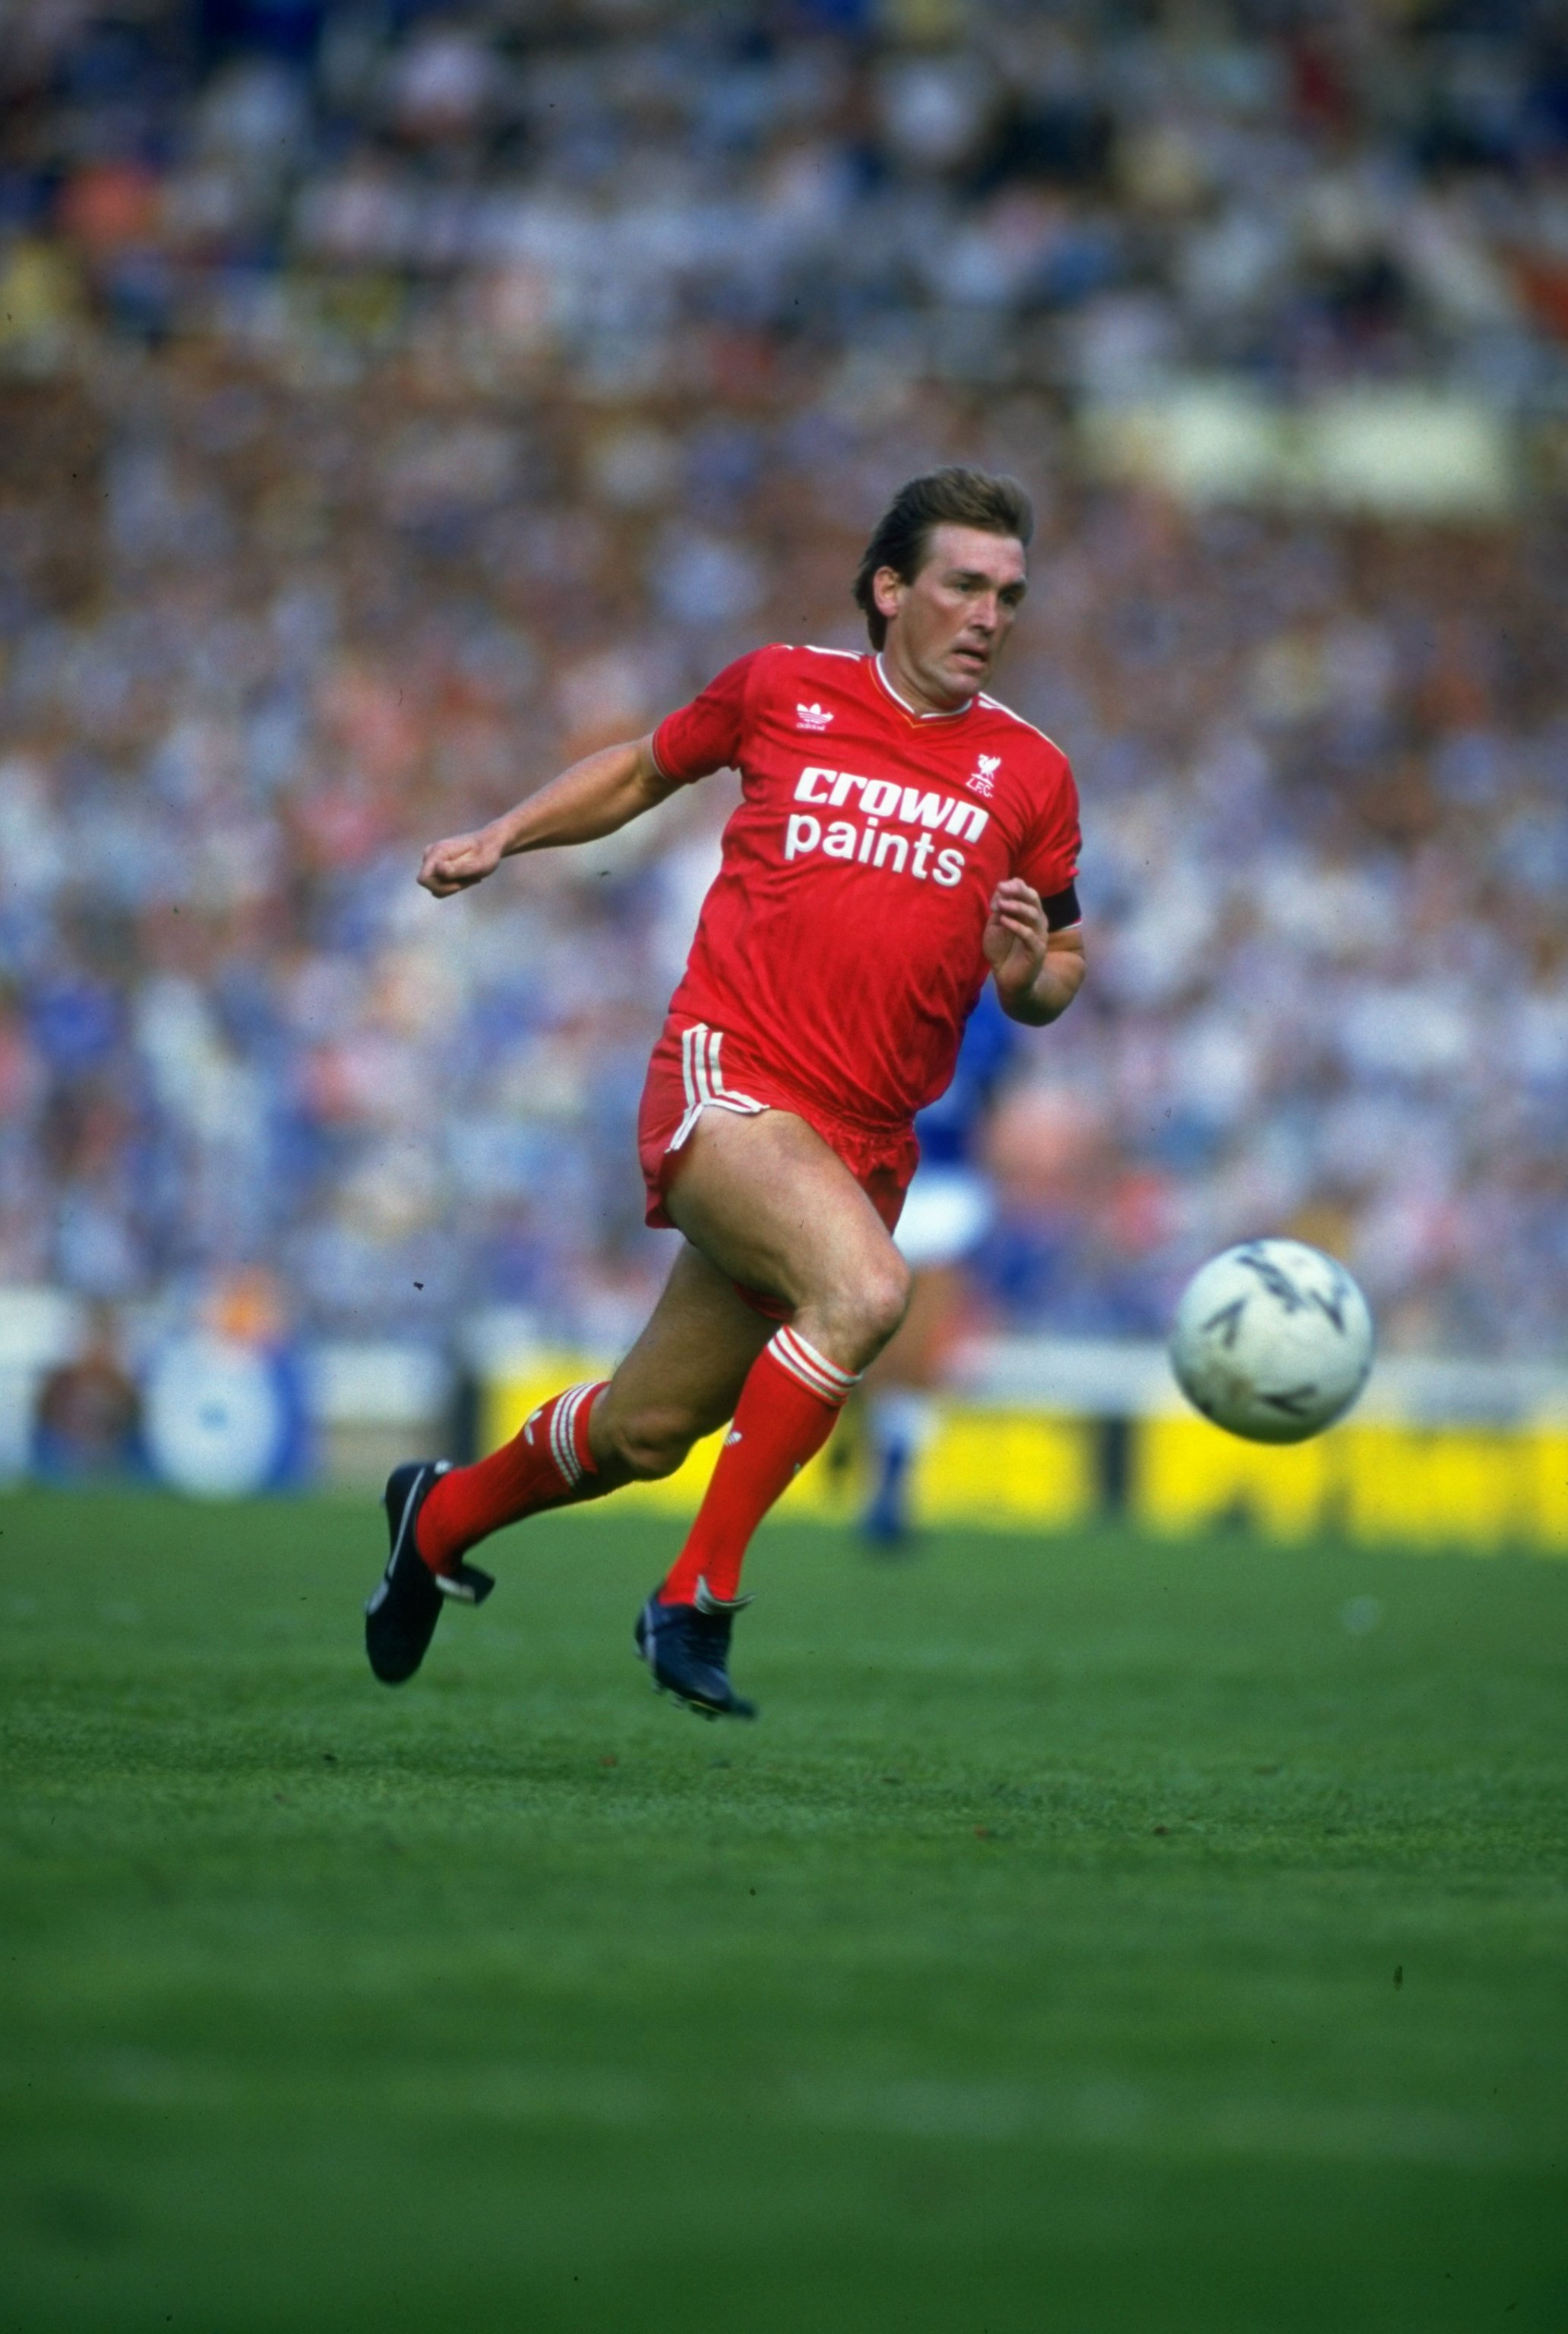 1986:  Kenny Dalglish of Liverpool in action during the Charity Shield match against Everton at Wembley Stadium in London. The match ended in a 1-1 draw. \ Mandatory Credit: David  Cannon/Allsport